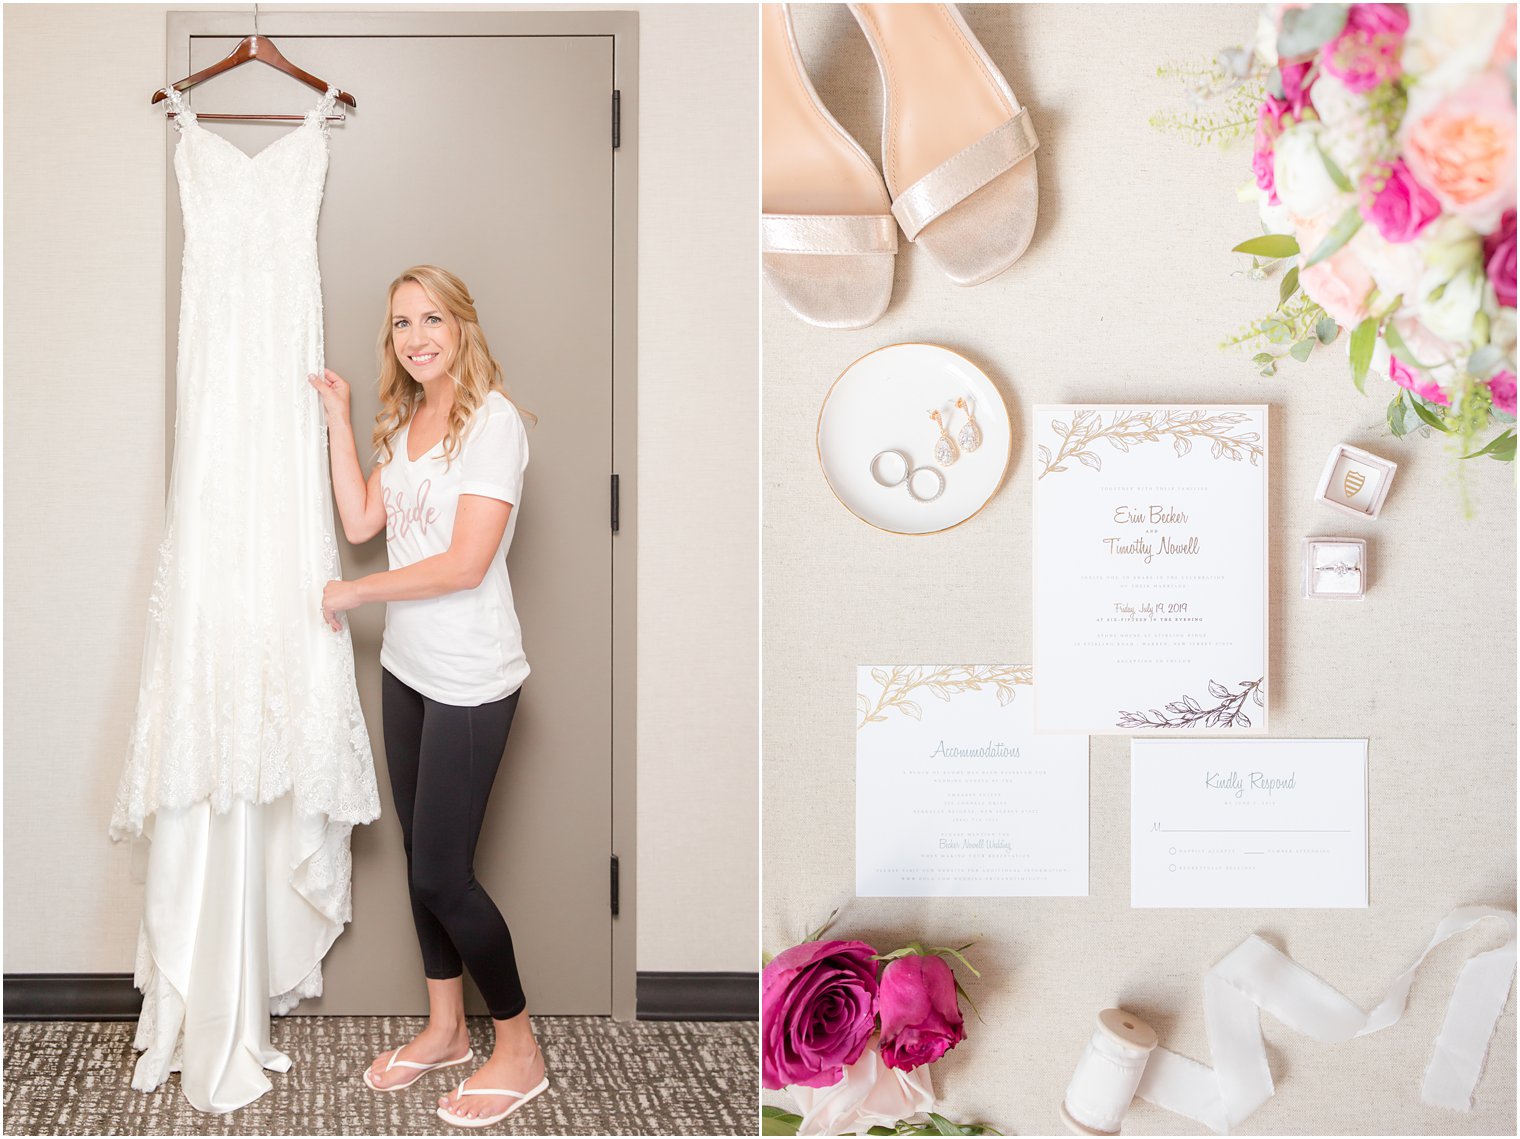 Bride and her dress and invitation | Stone House at Stirling Ridge Wedding Photography by Idalia Photography